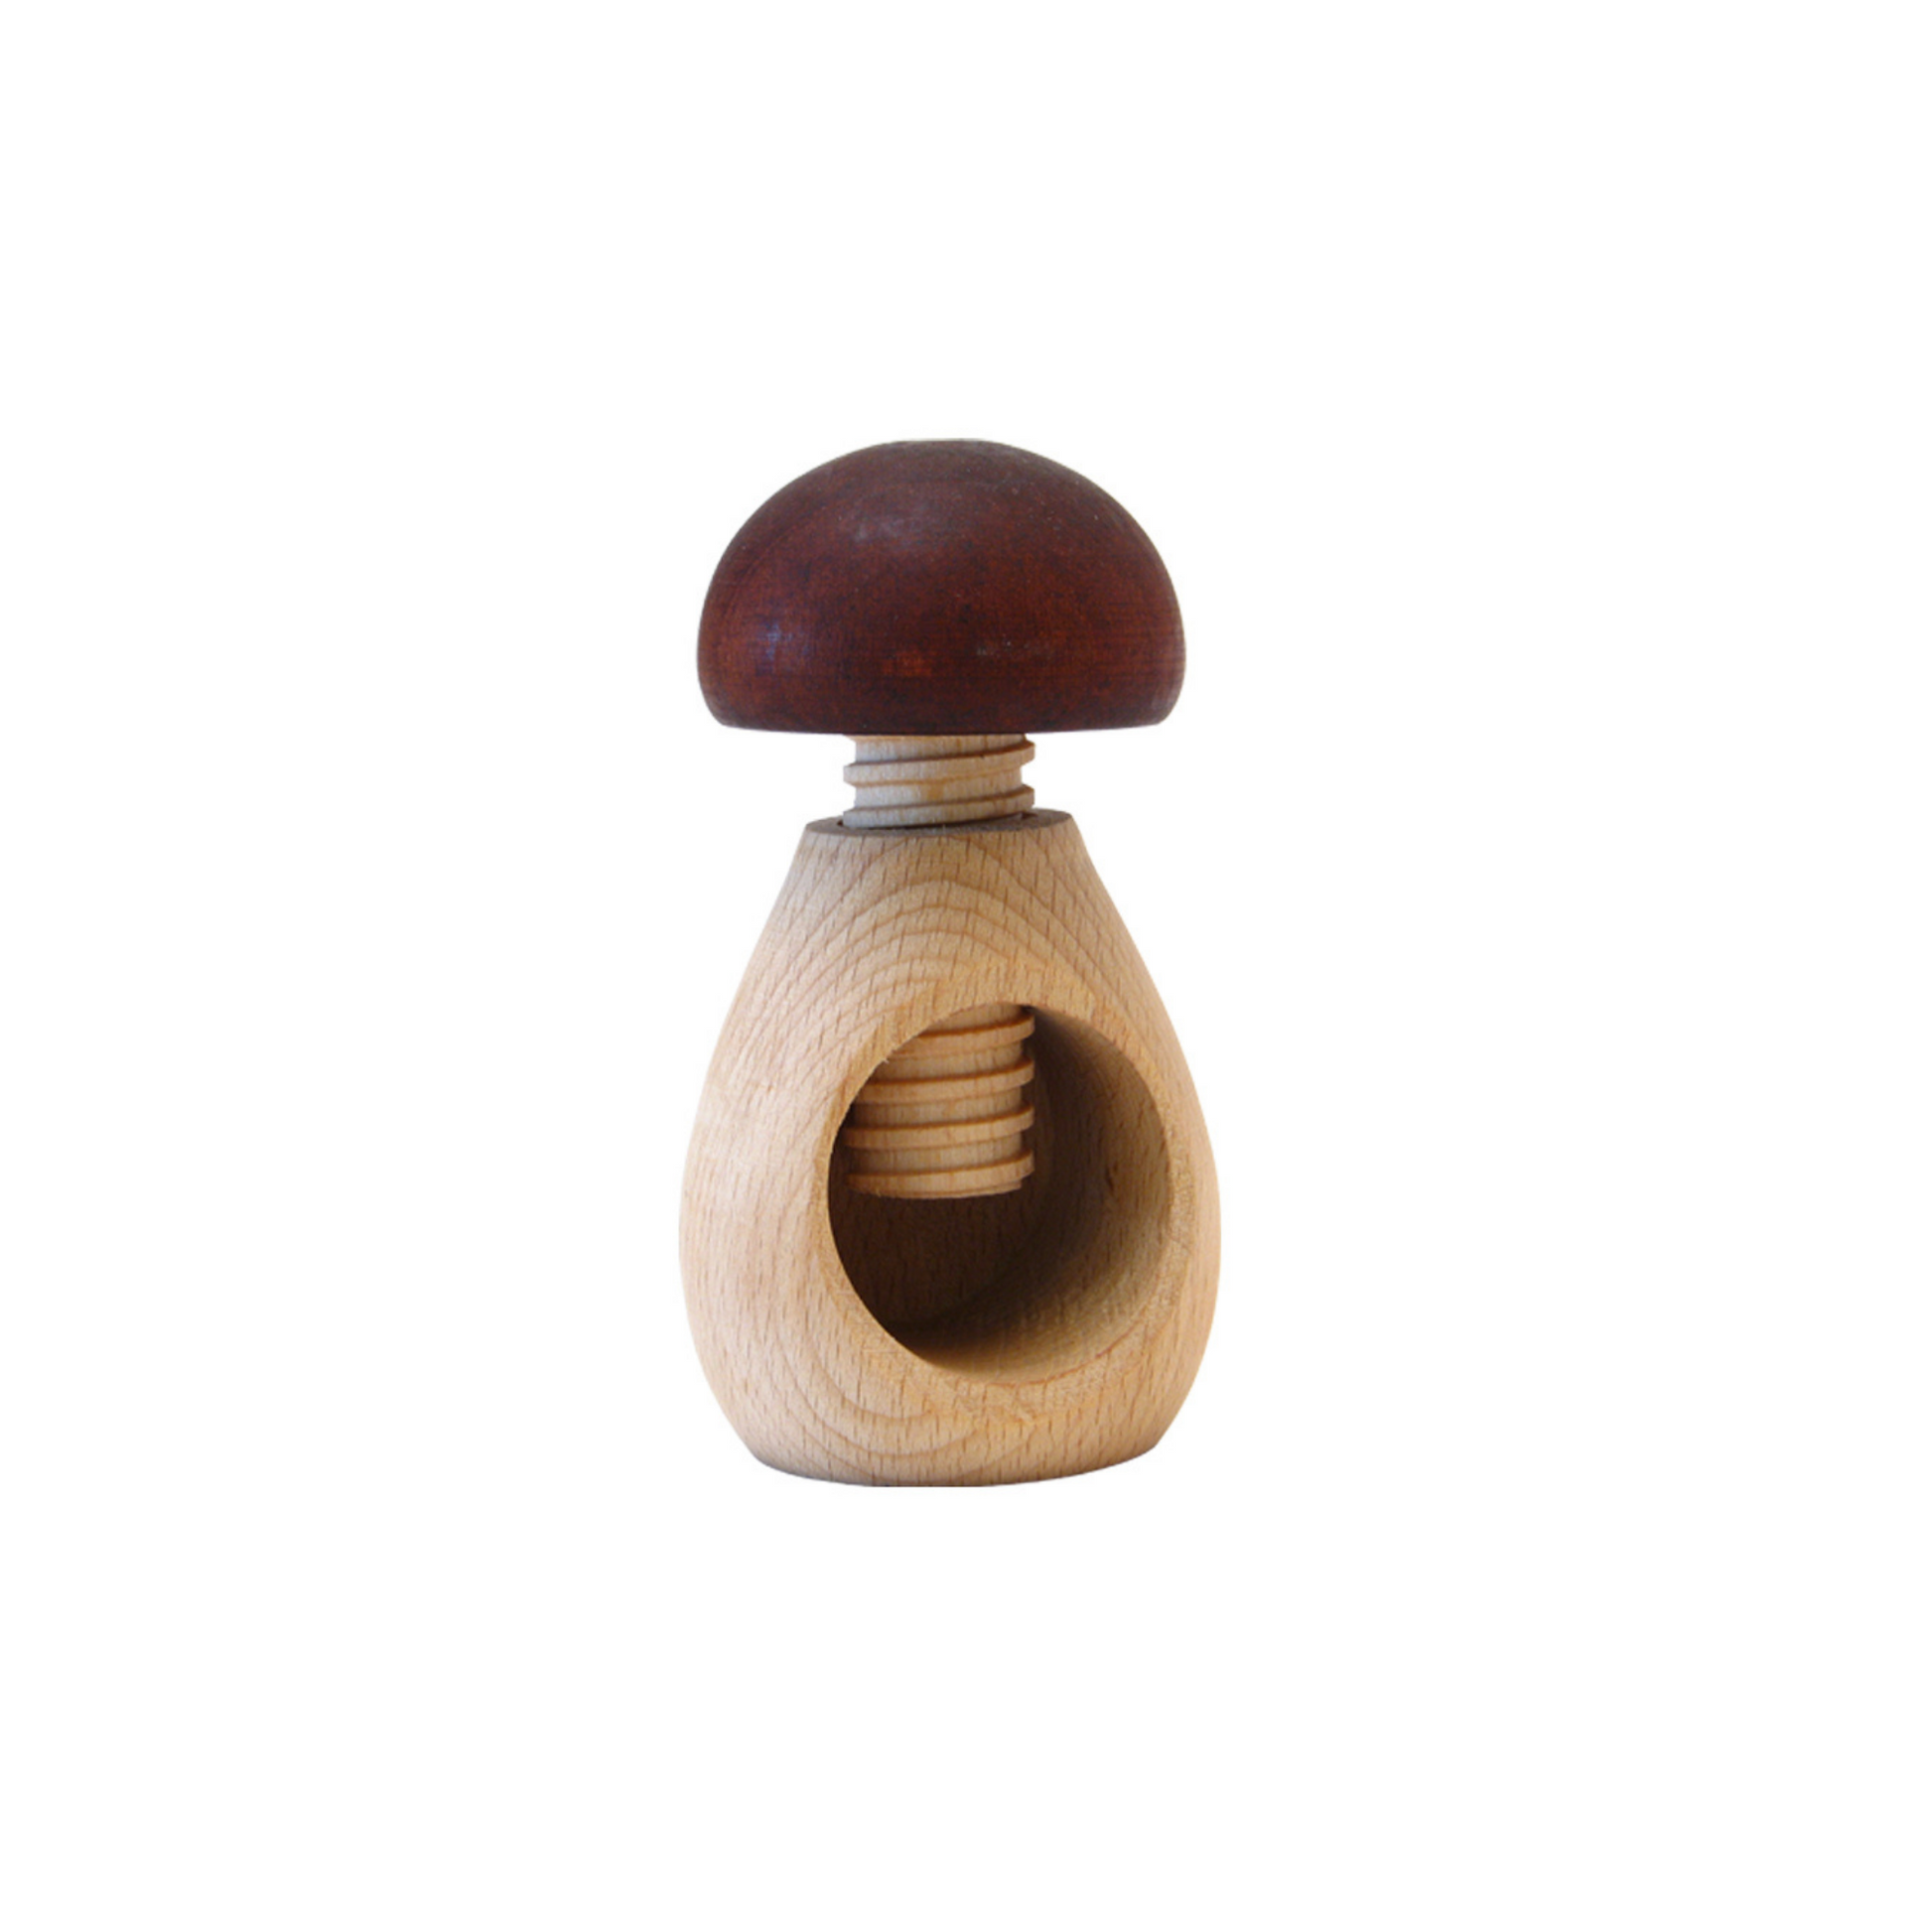 Mushroom Wooden Nutcraker Made in France Clementine Boutique Canada